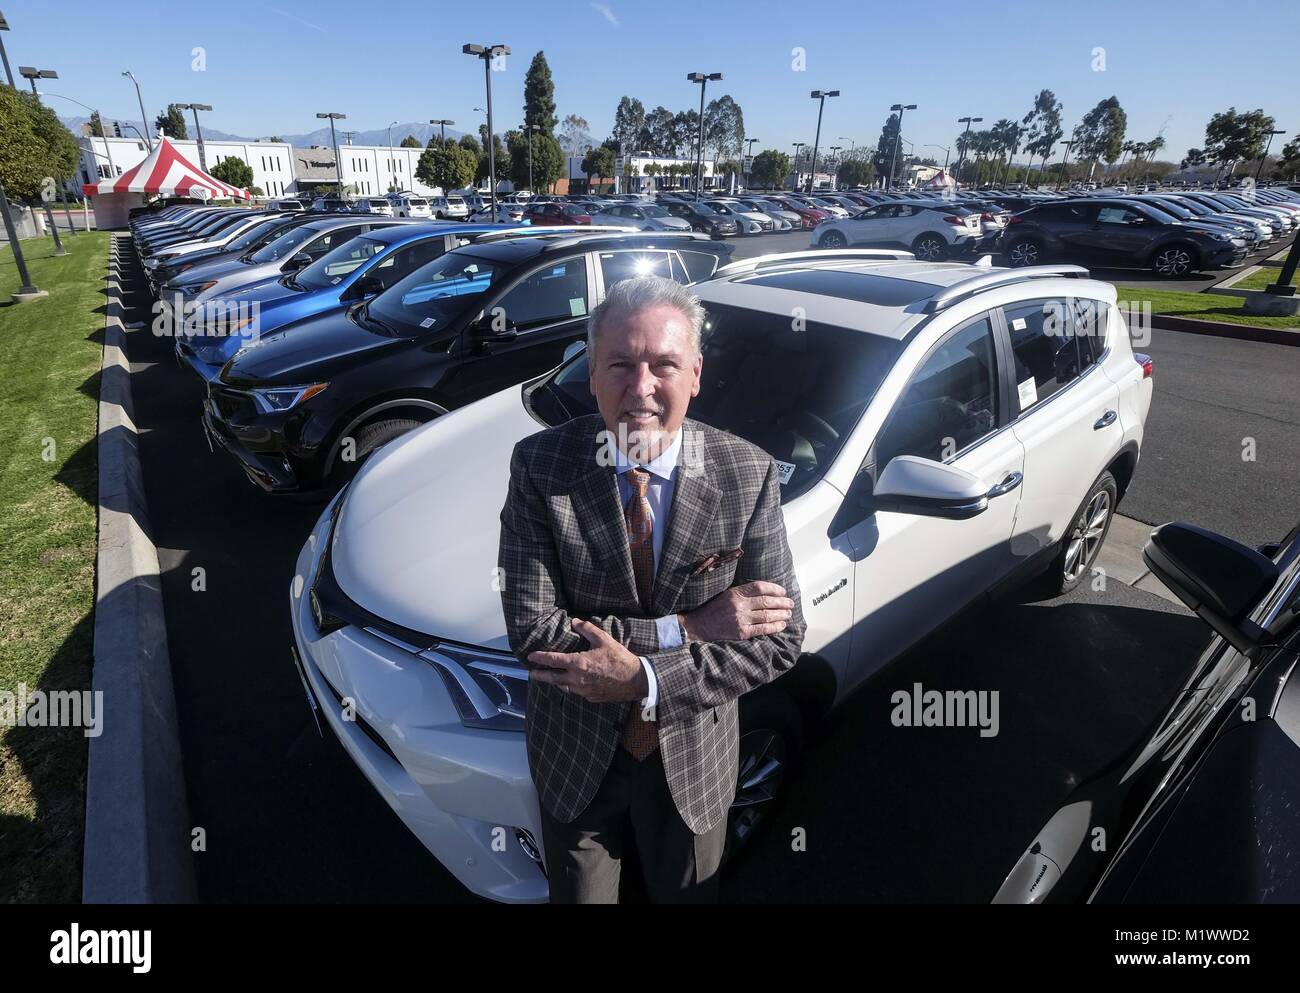 Los Angeles, California, USA. 24th Jan, 2018. Nick Cardin, general manager of Puente Hills Toyota/Scion in City of Industry. Credit: Ringo Chiu/ZUMA Wire/Alamy Live News Stock Photo